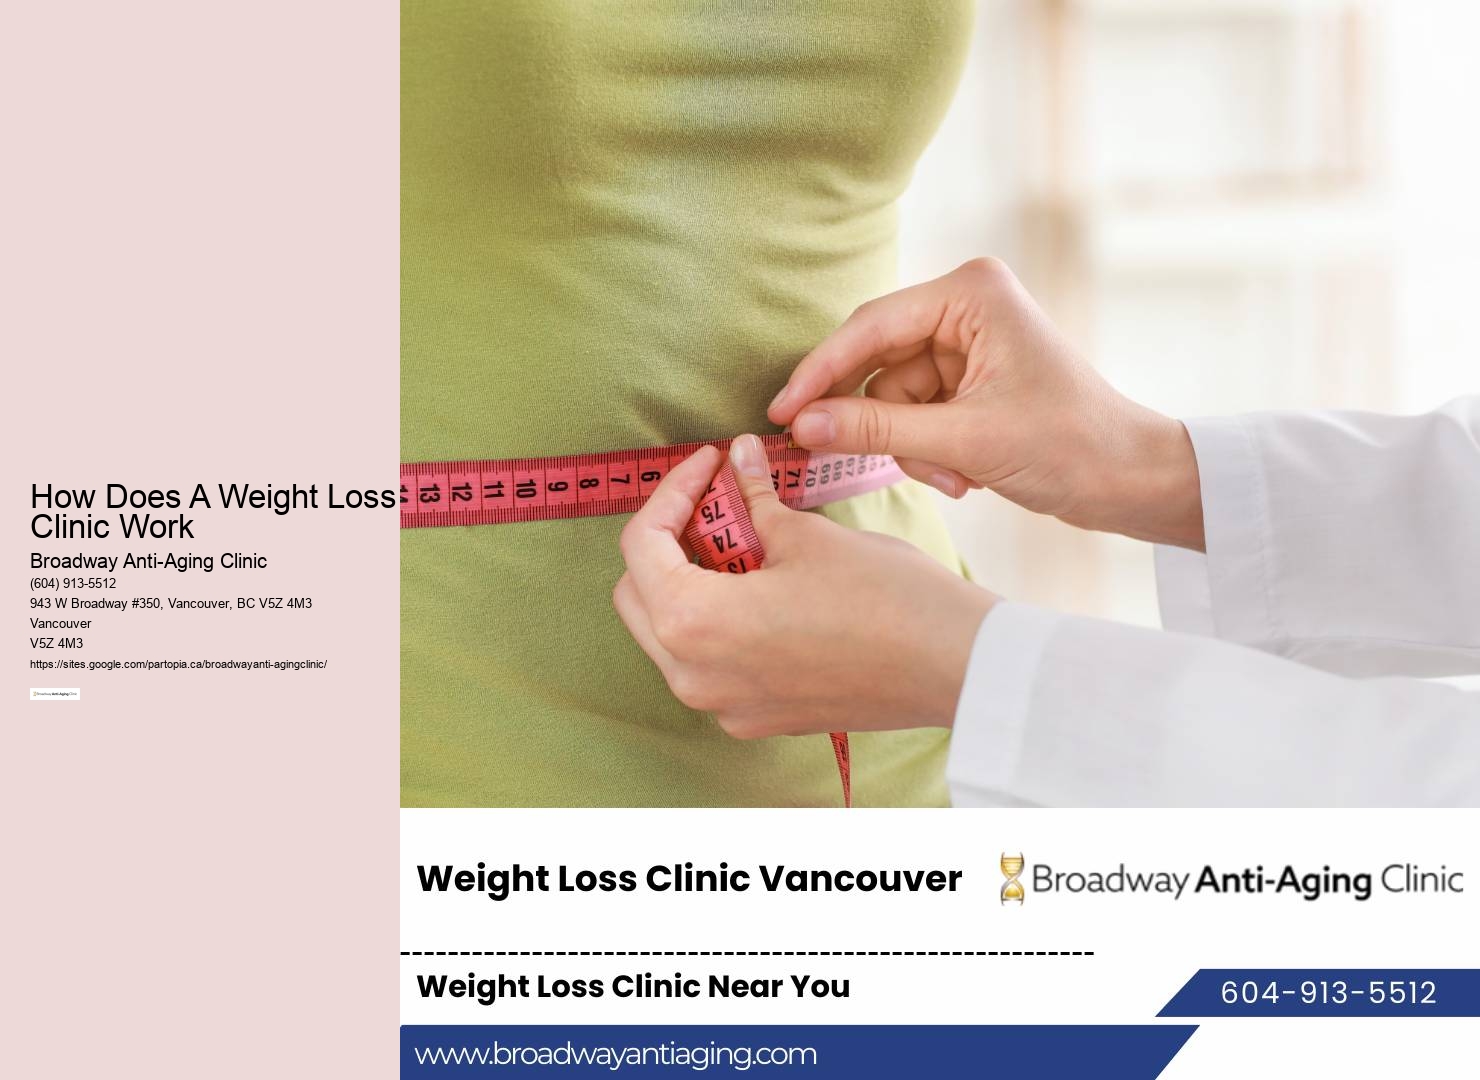 Weight Loss Programs and Plans Vancouver